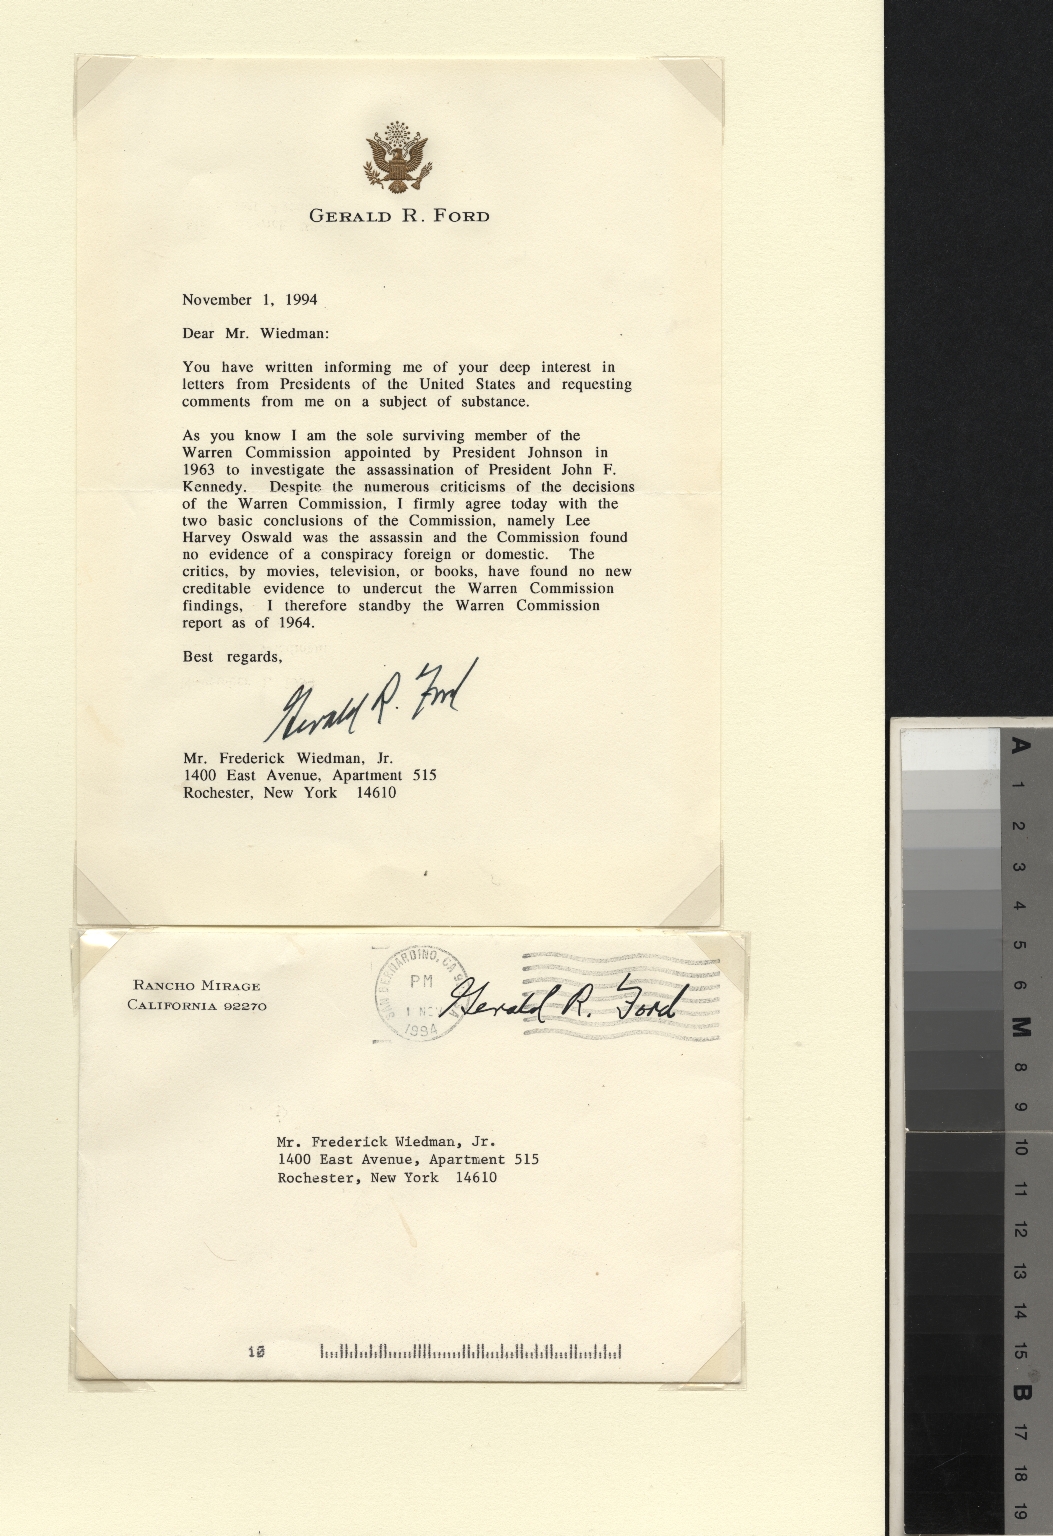 Gerald Ford letter to Frederick Wiedman, Jr.